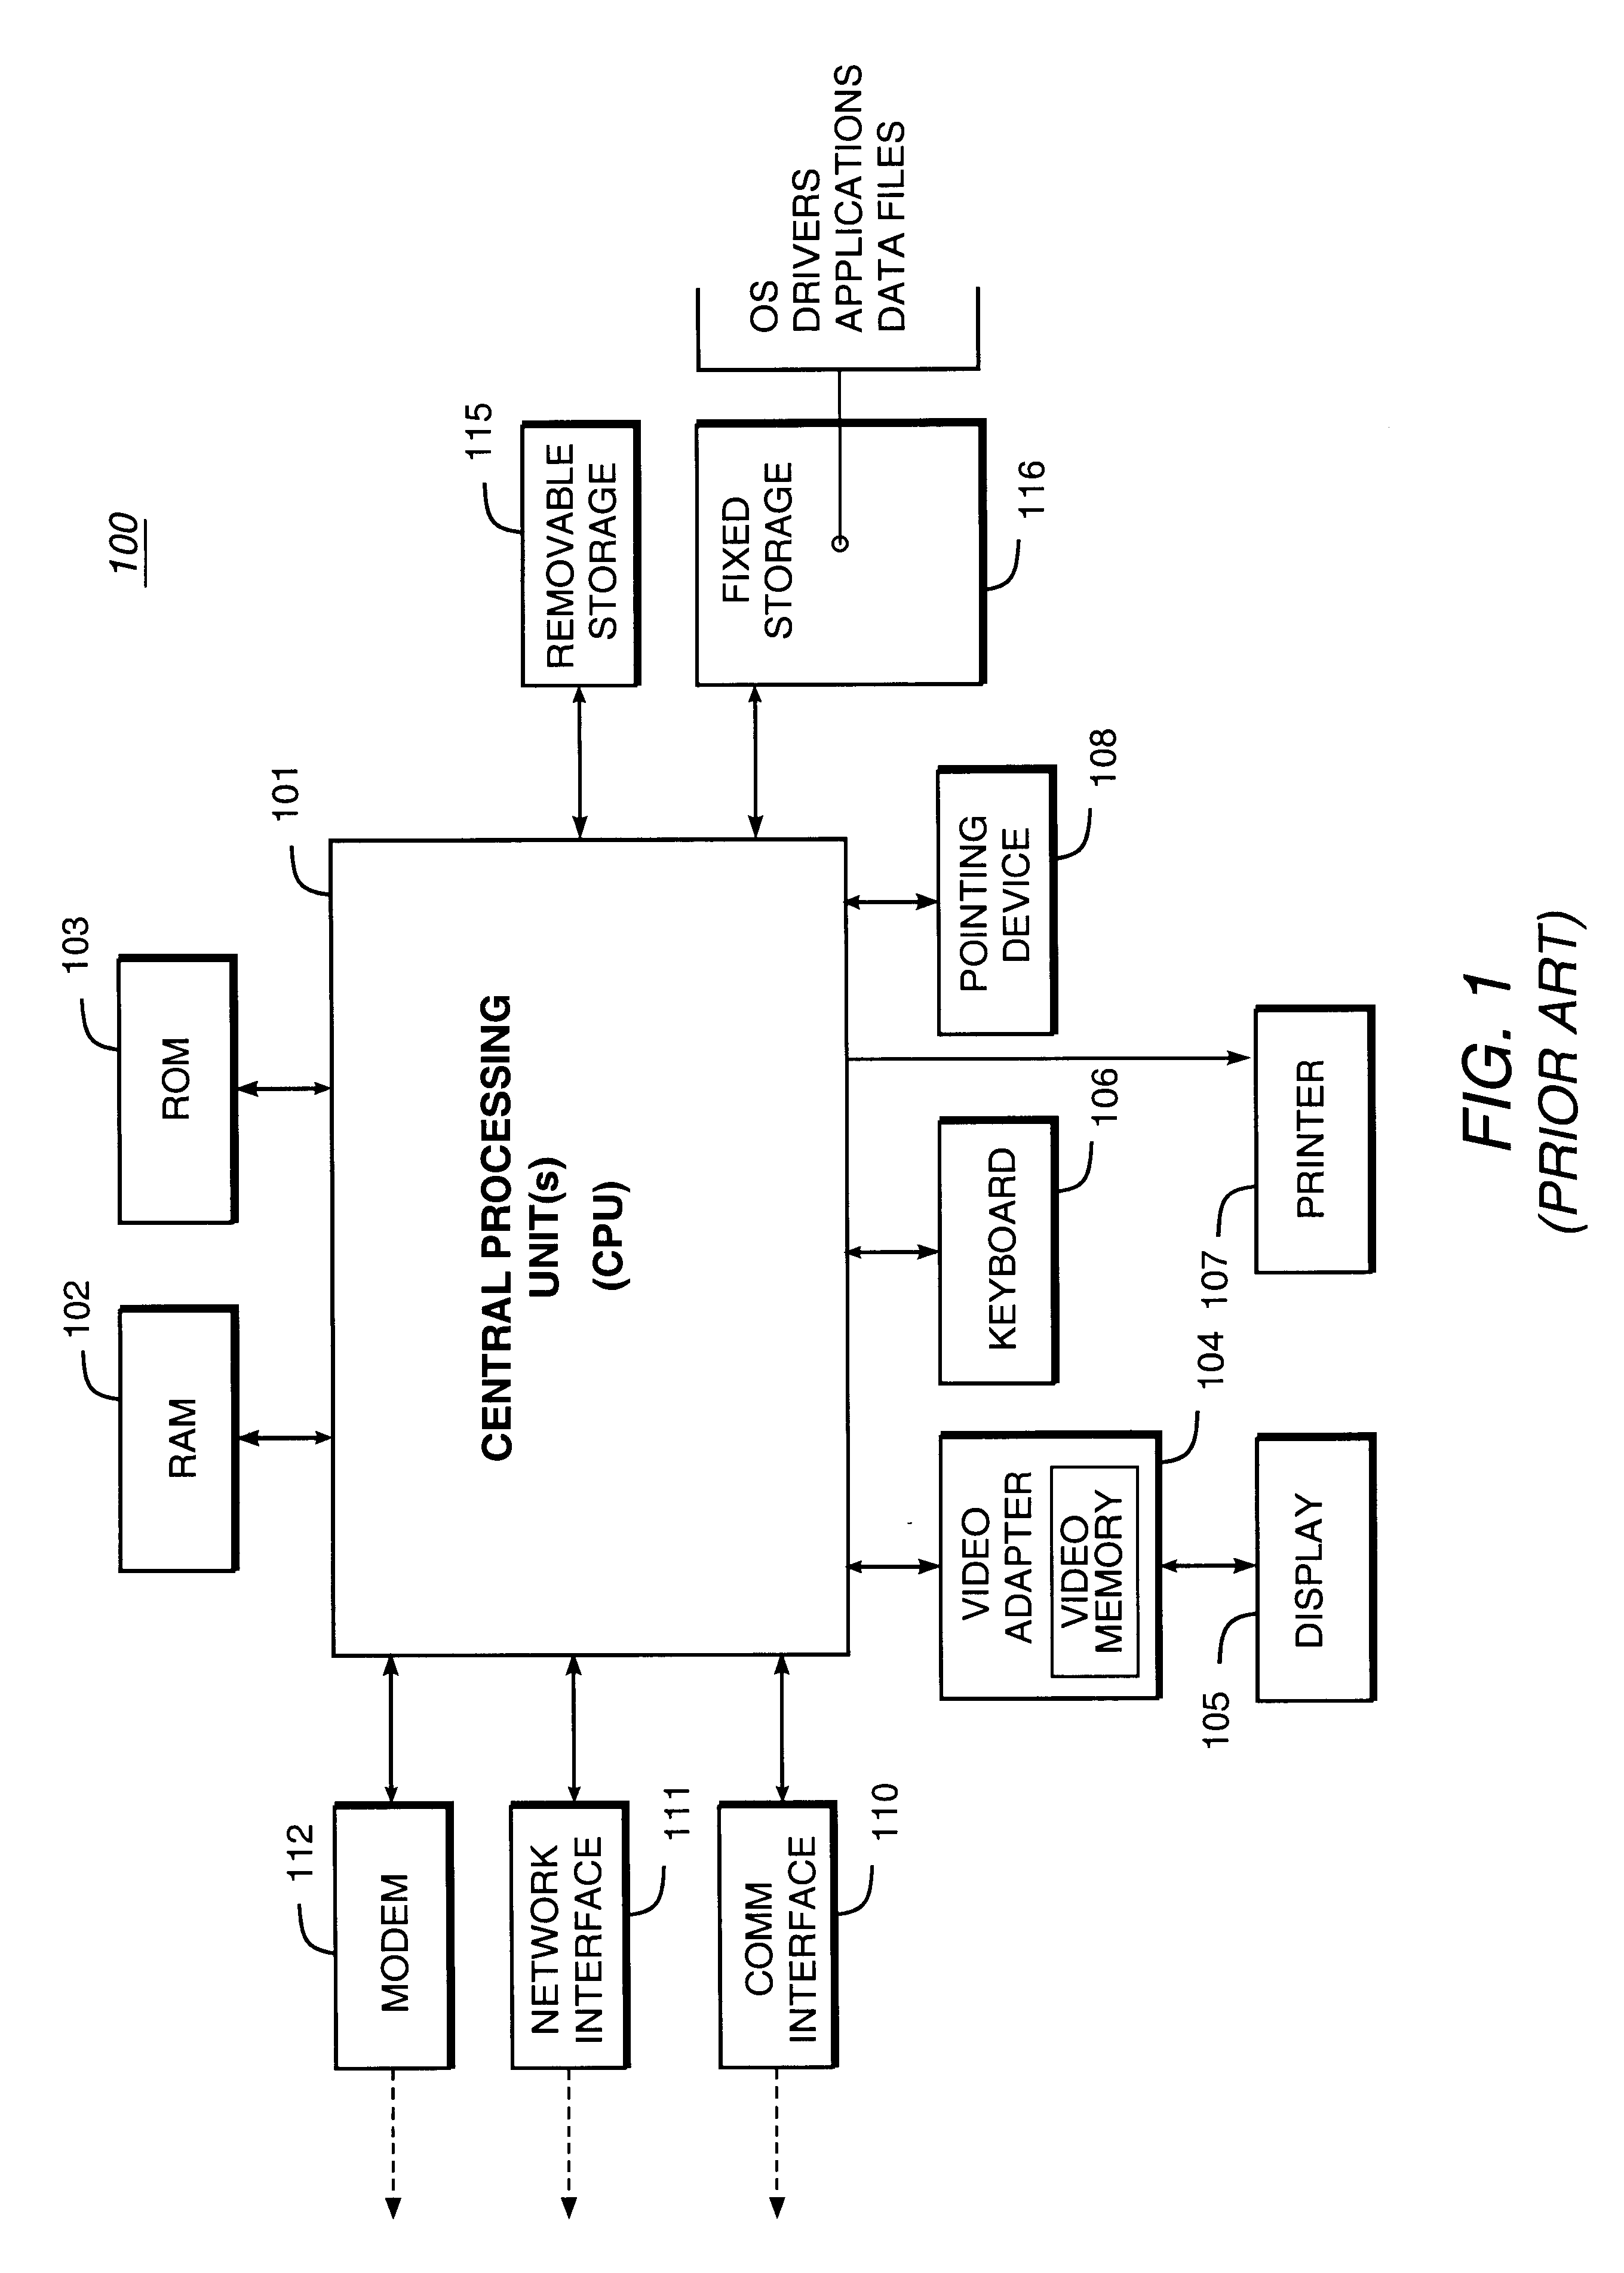 System and methodology for providing fixed UML layout for an object oriented class browser